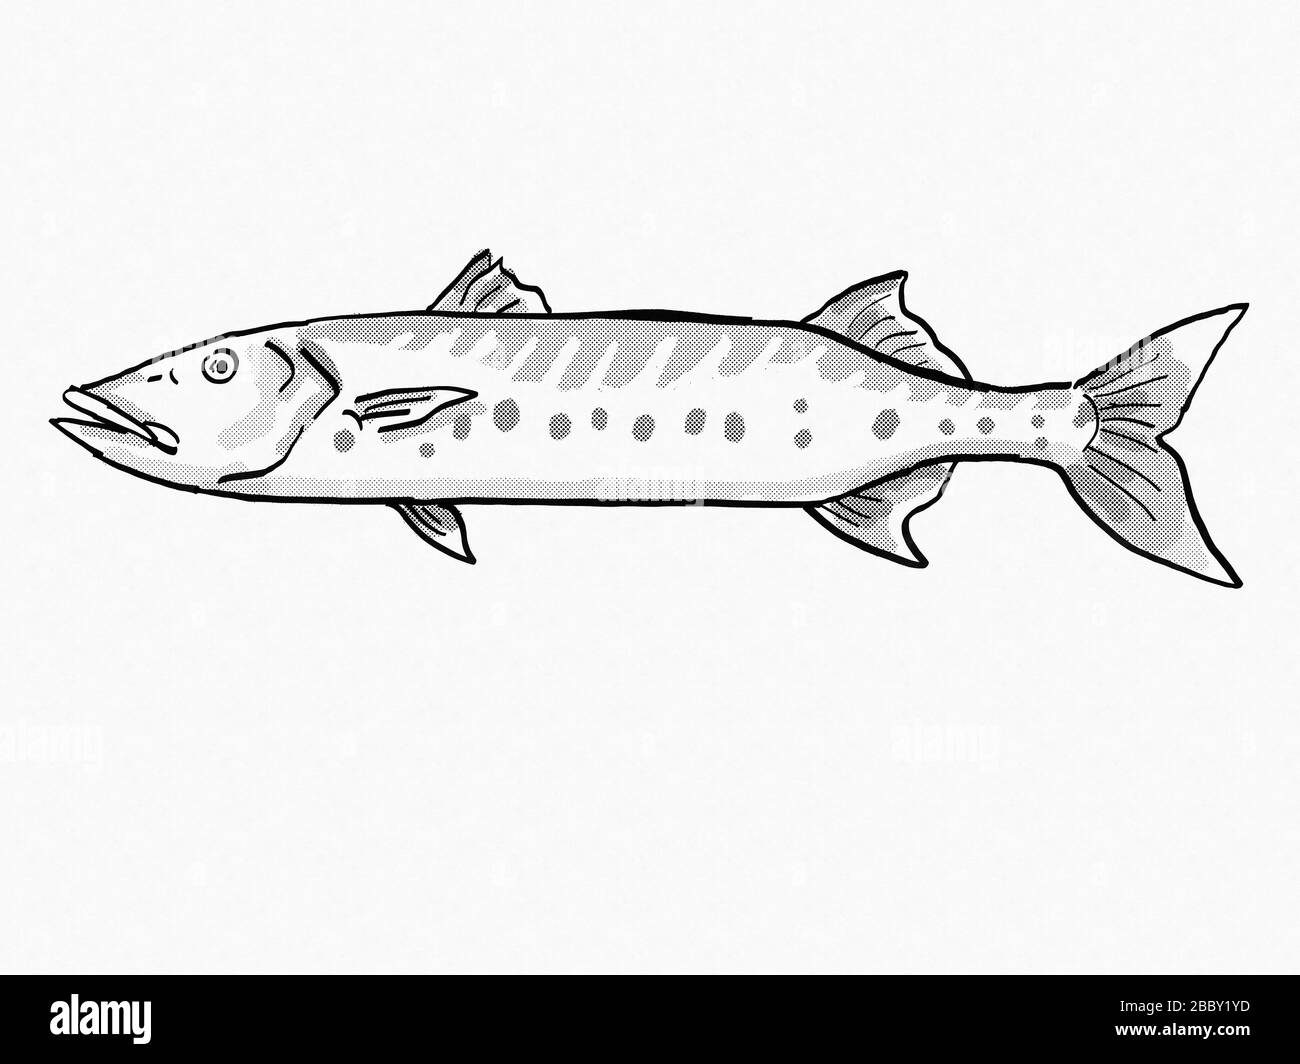 Barracuda fish black and white stock photos images